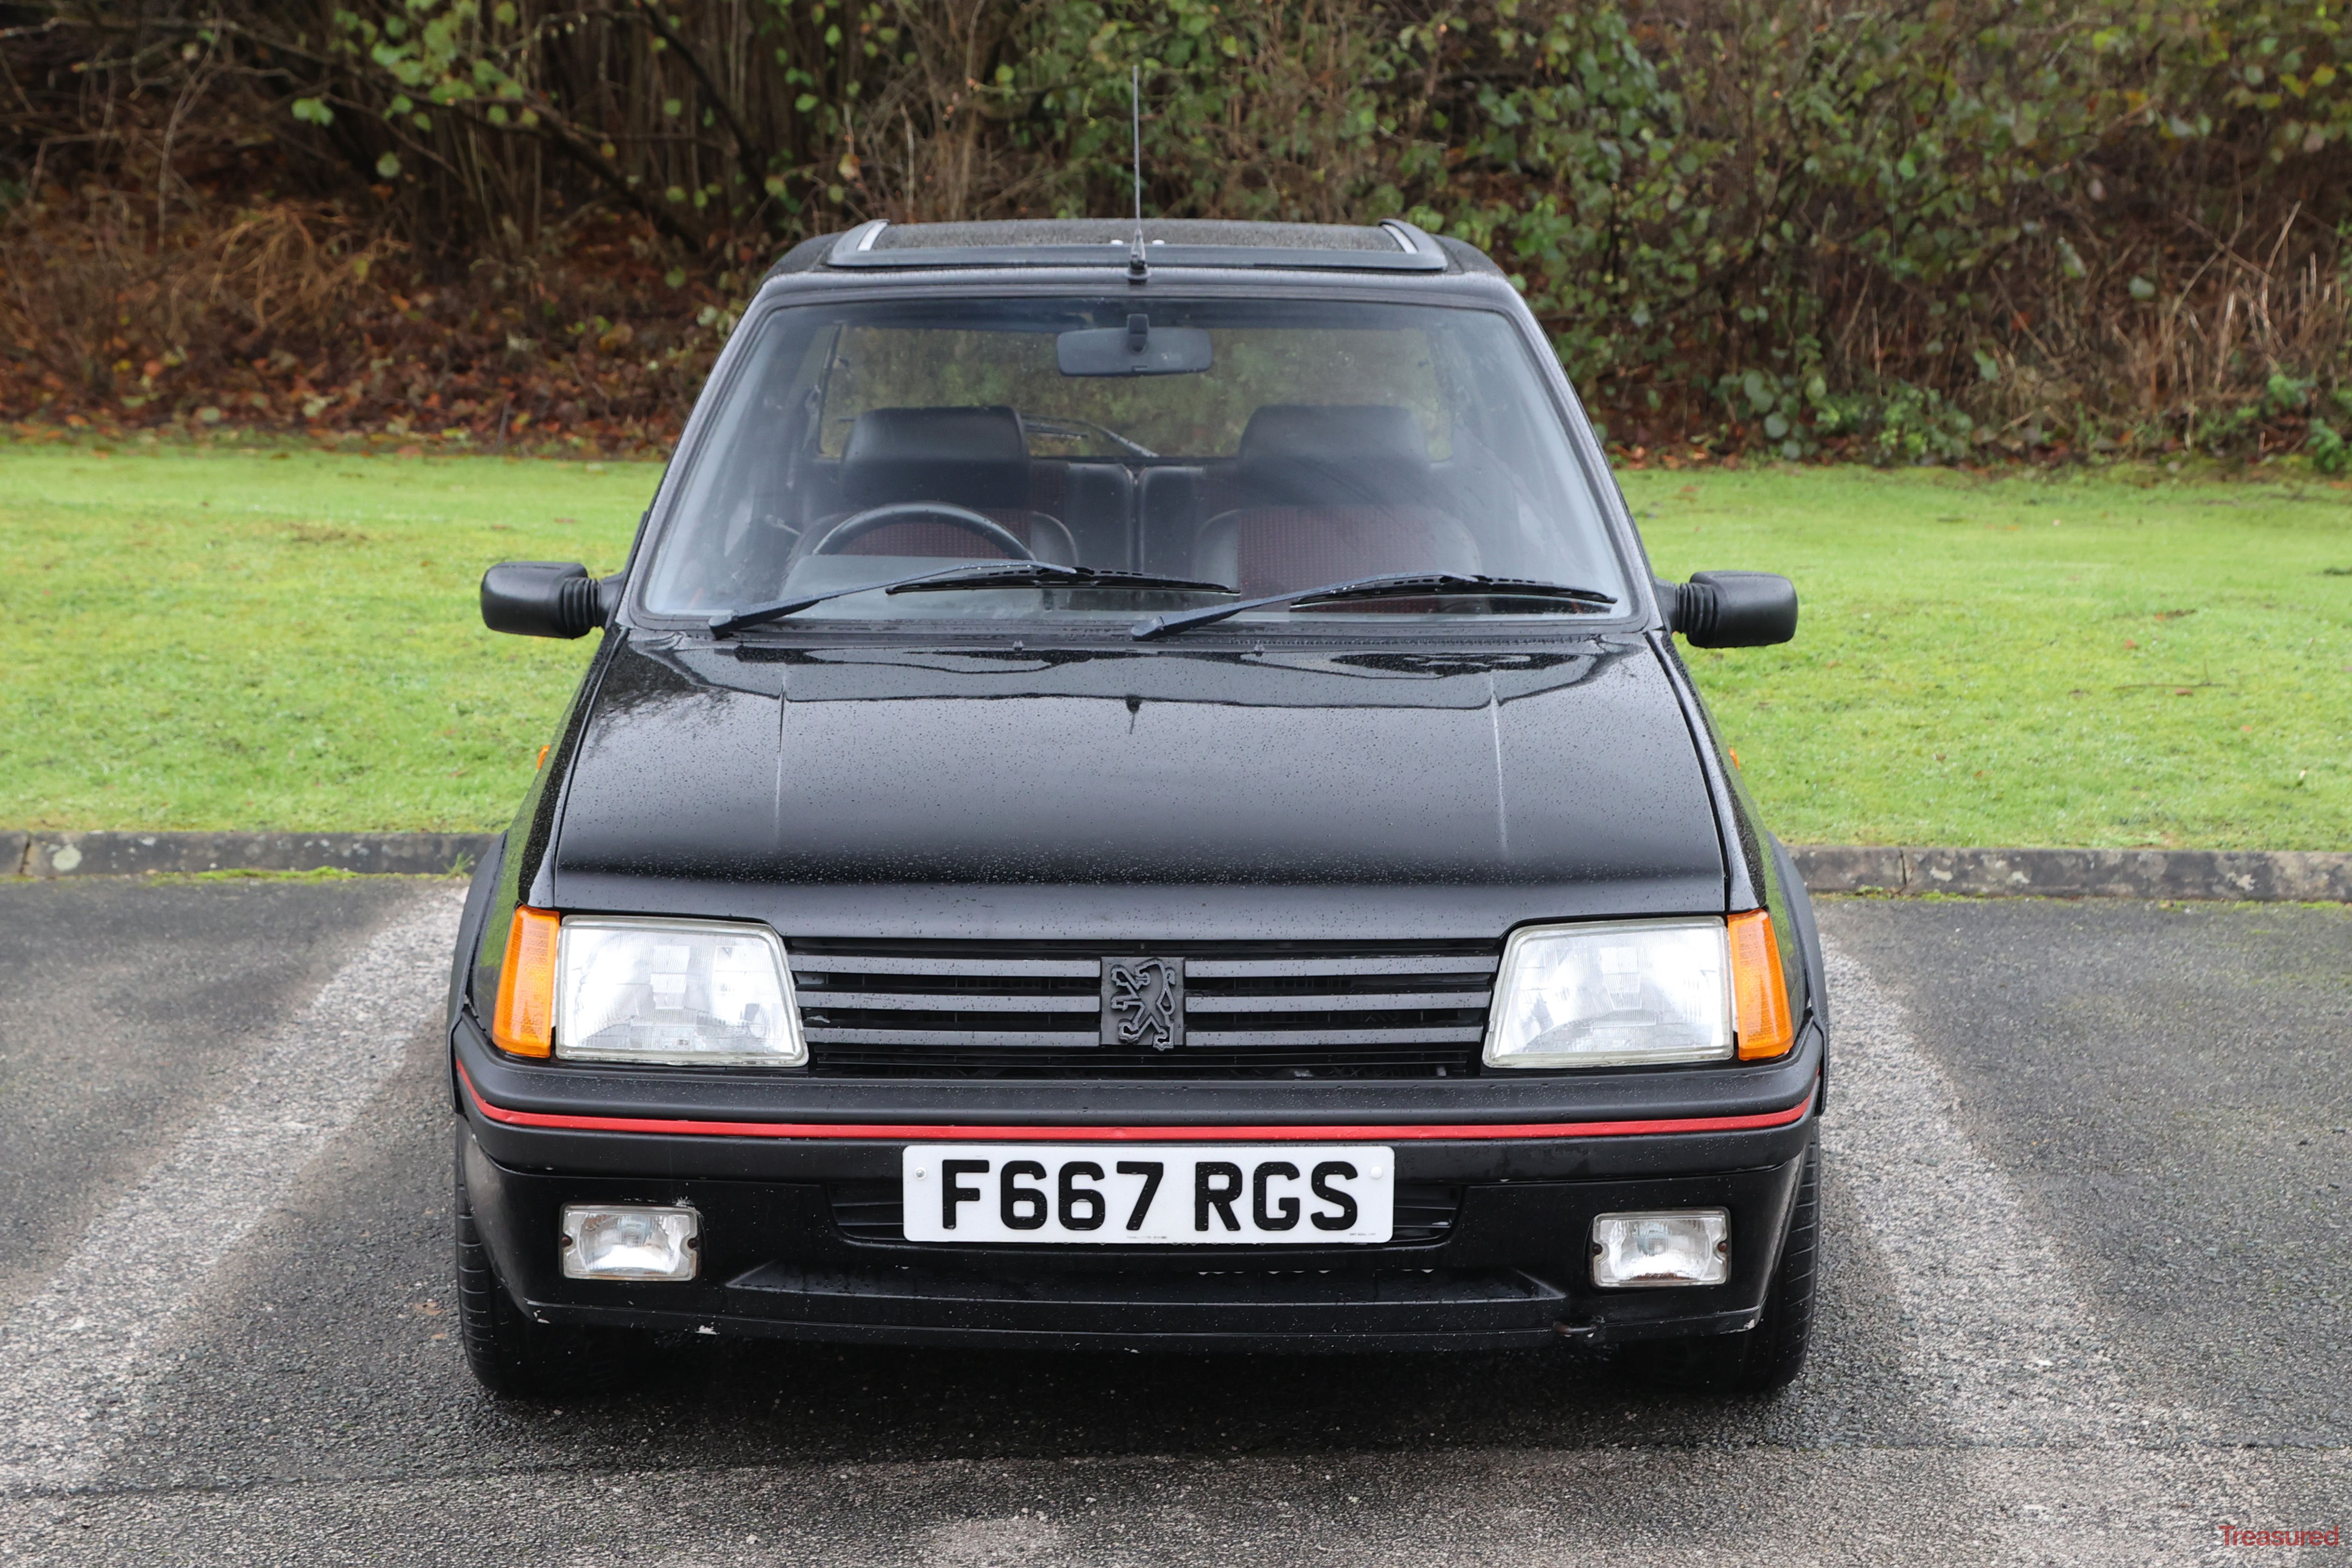 We would drive this low-mileage Peugeot 205 GTI all across France